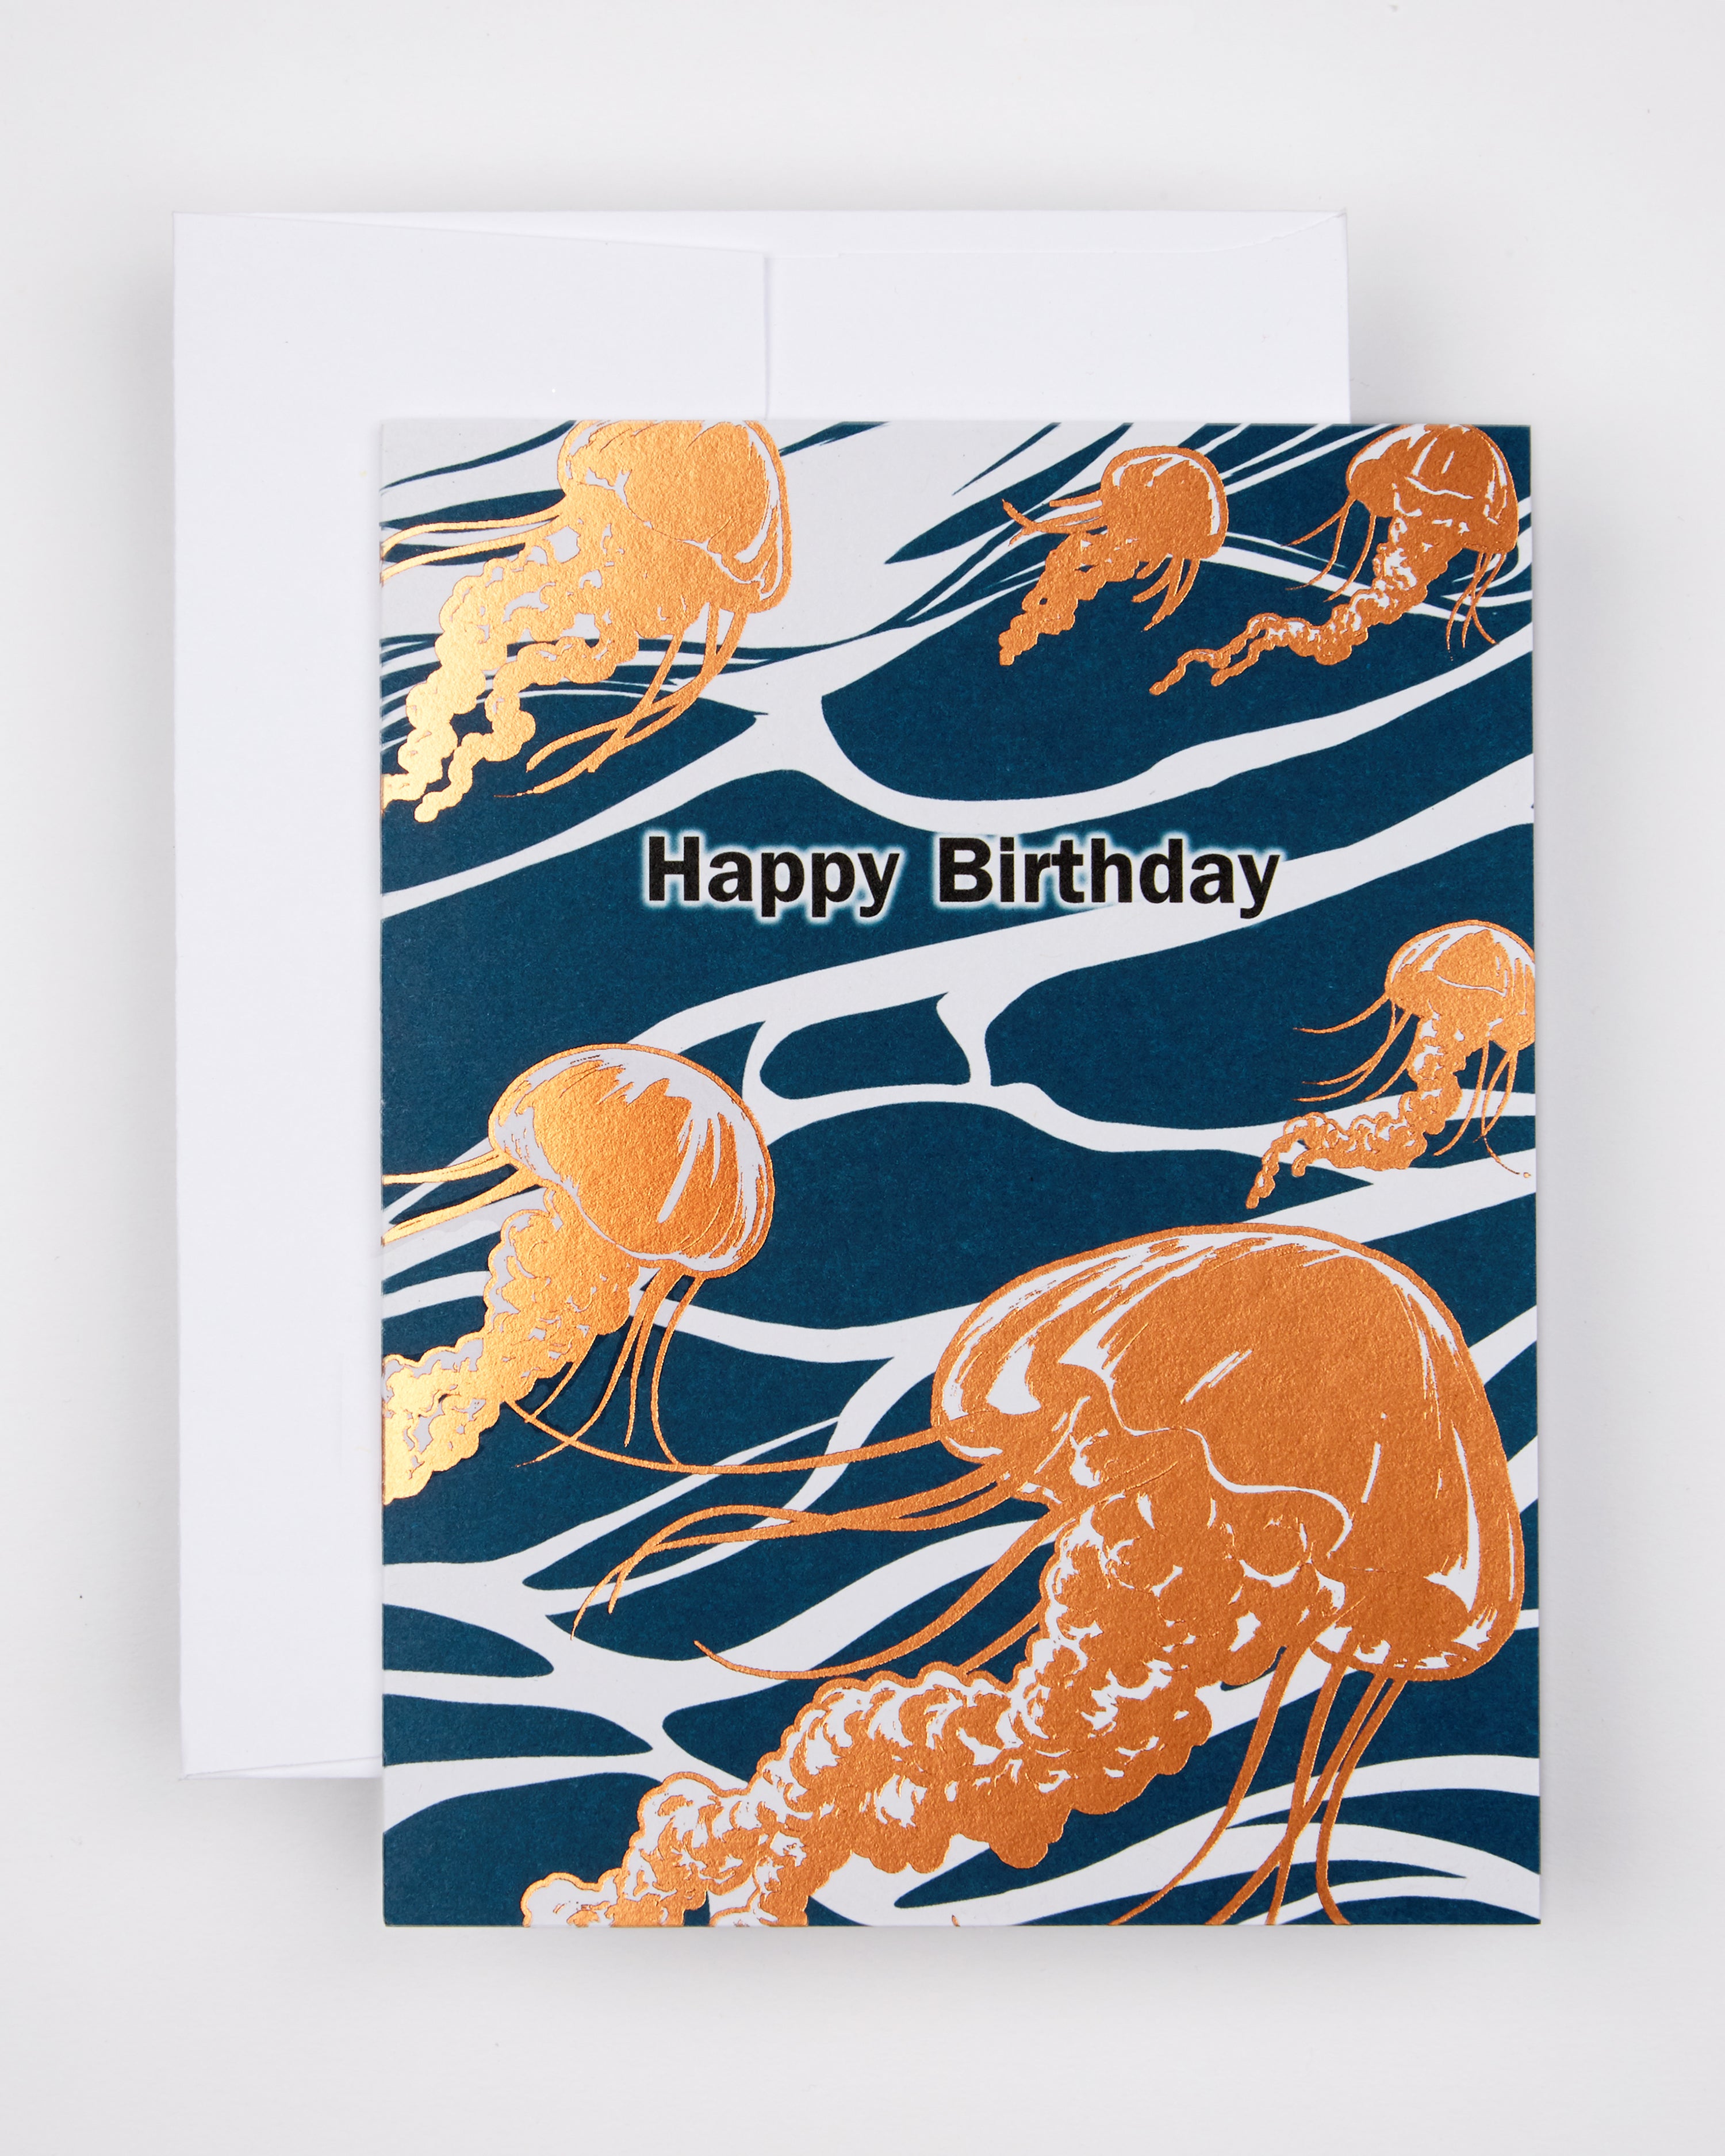 Greeting card with the text Happy Birthday amid golden jellyfish